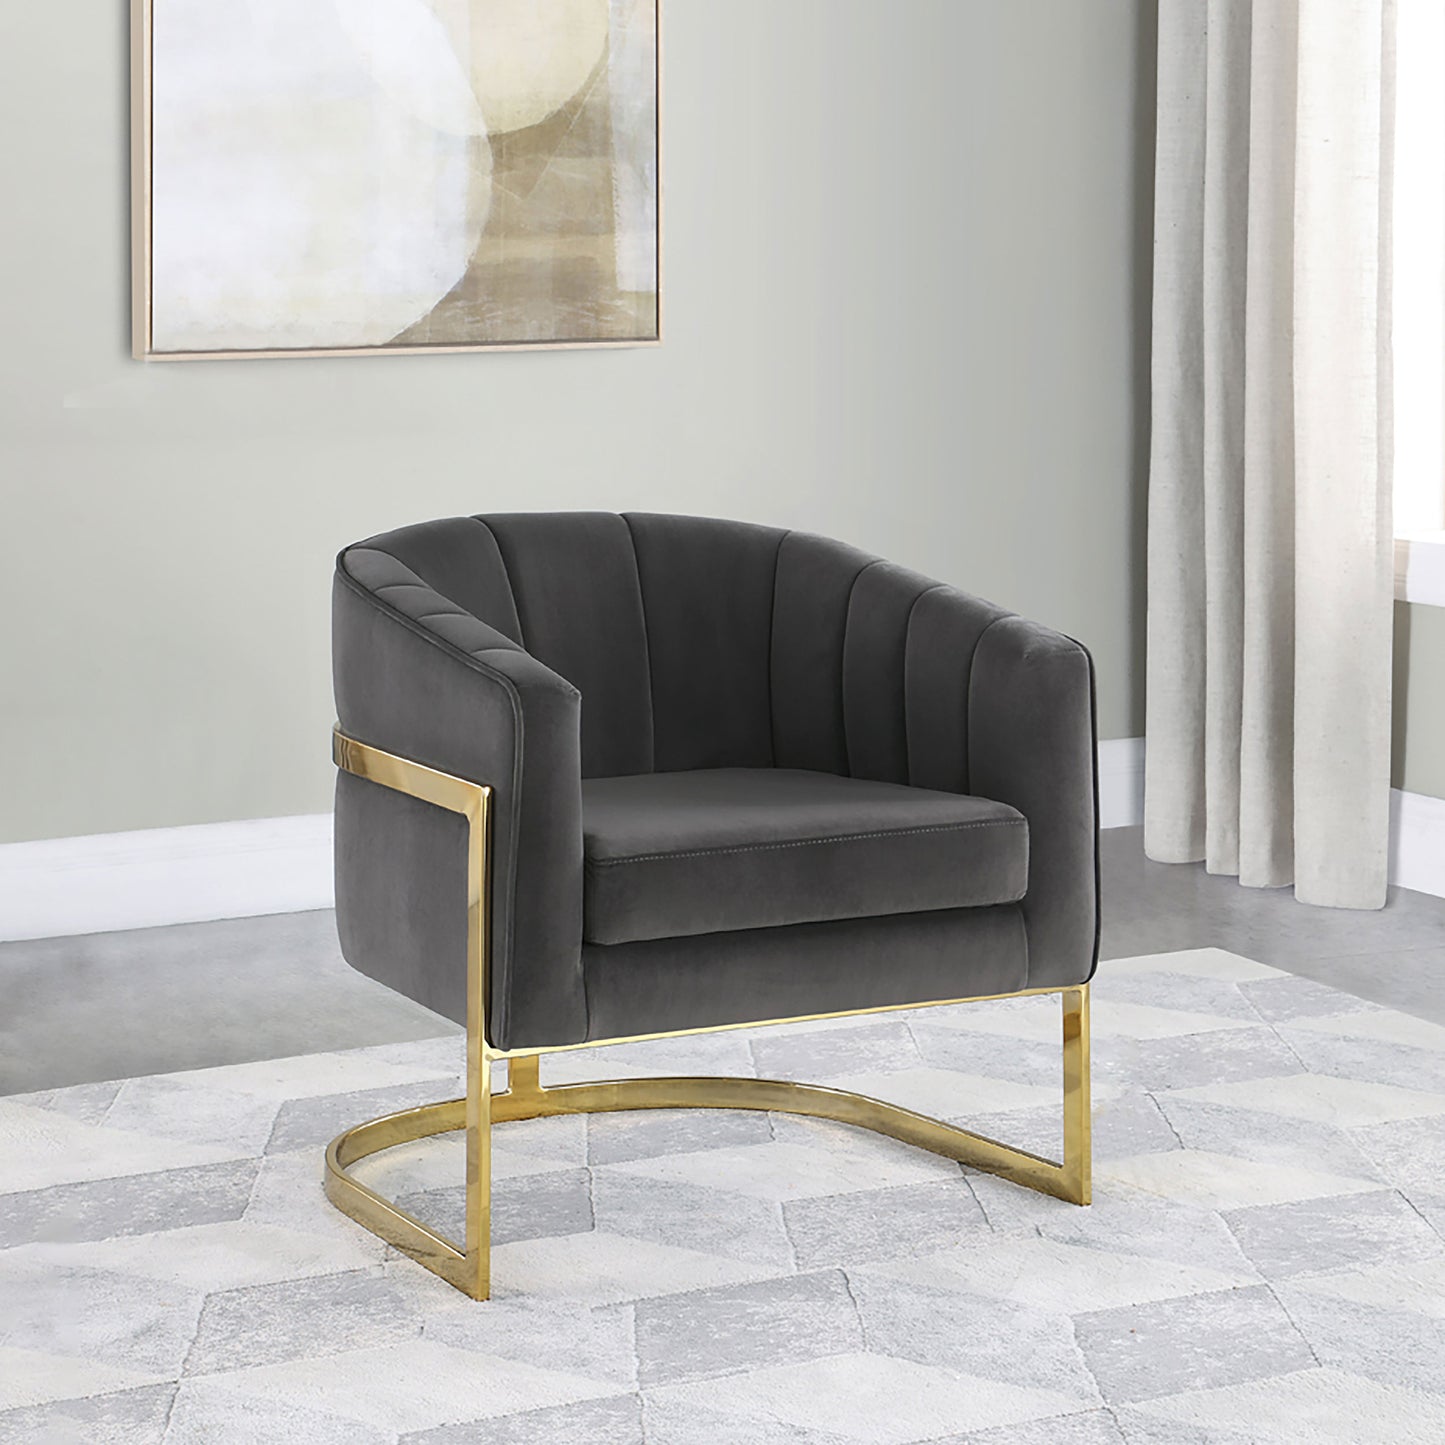 Alamor Tufted Barrel Accent Chair Dark Grey and Gold